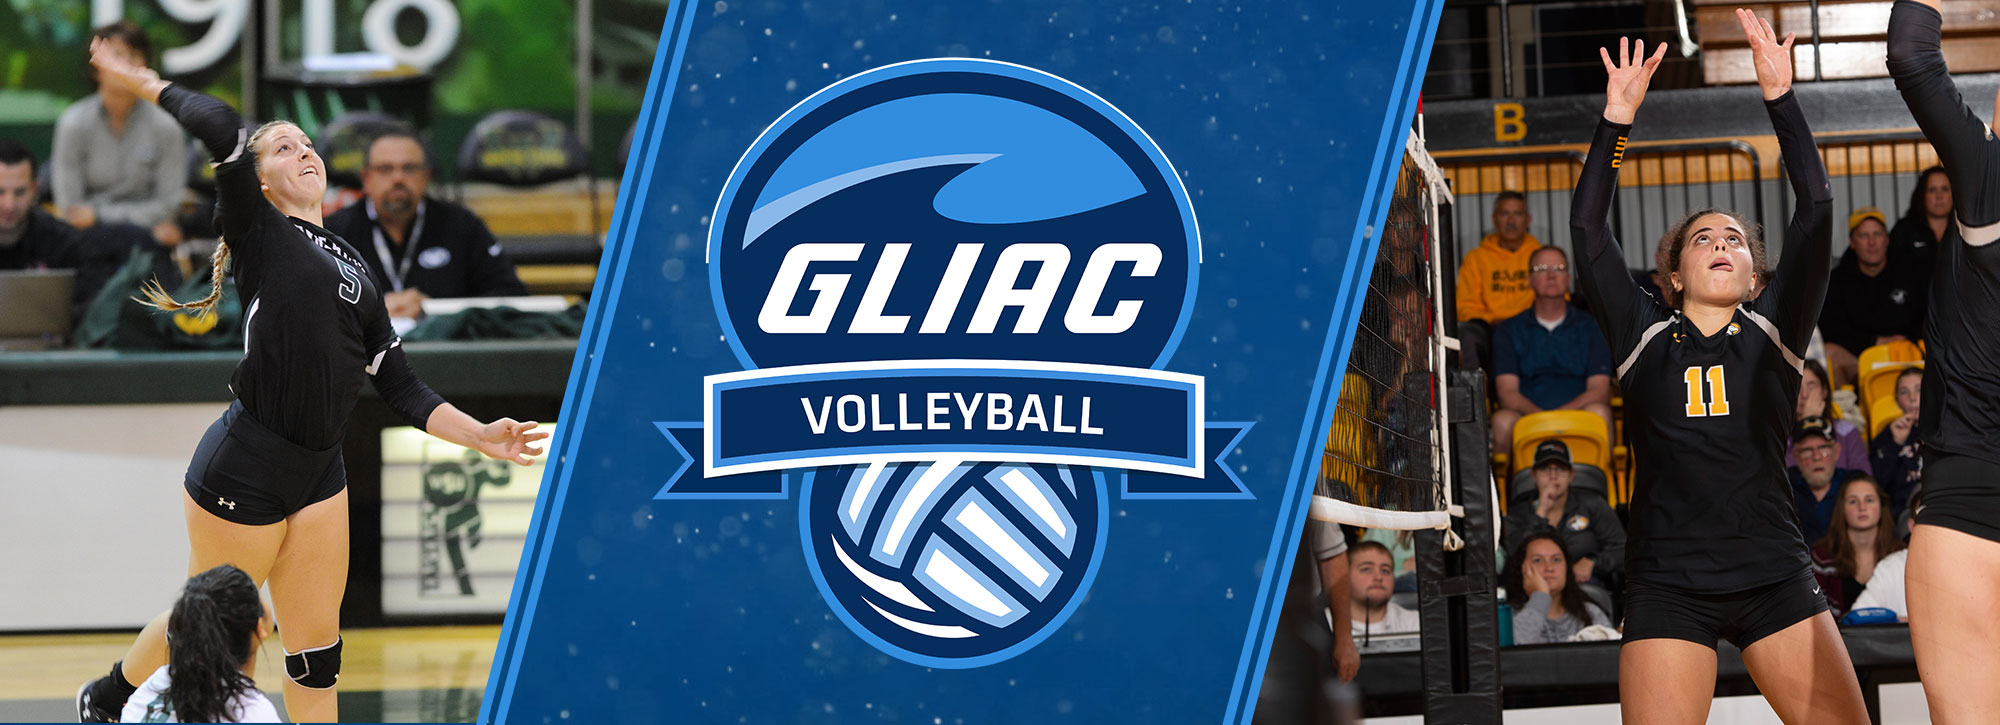 Michigan Tech's DeMarchi, Wayne State's Richardson Earn GLIAC Volleyball Weekly Recognition